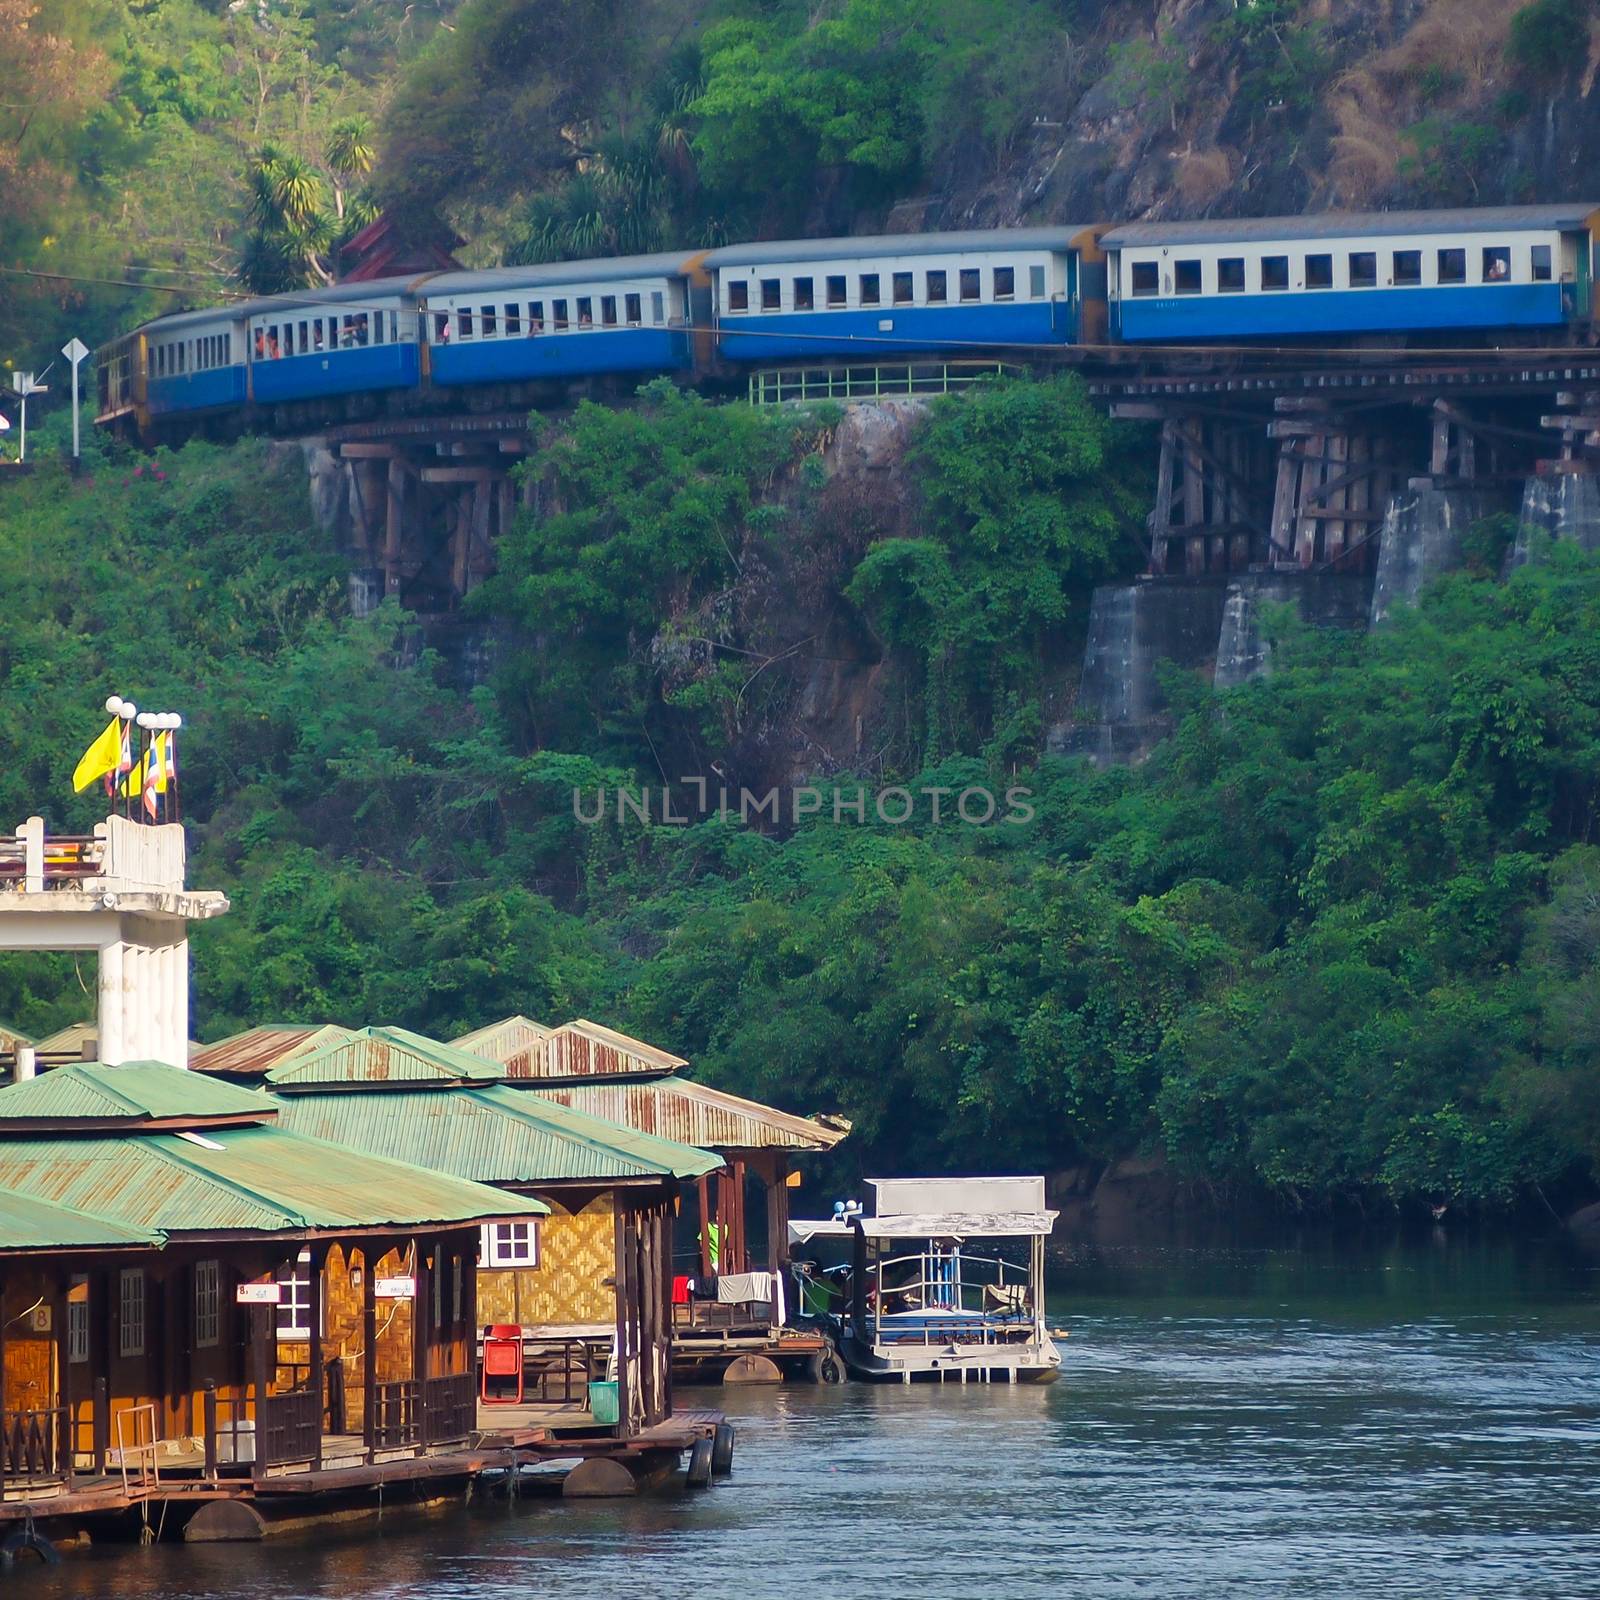 Kanchanaburi, Thailand - March 6, 2011 : River Kwai, and death Railway and Bridge of Death was built by the Empire of Japan, the second World War in Kanchanaburi, Thailand